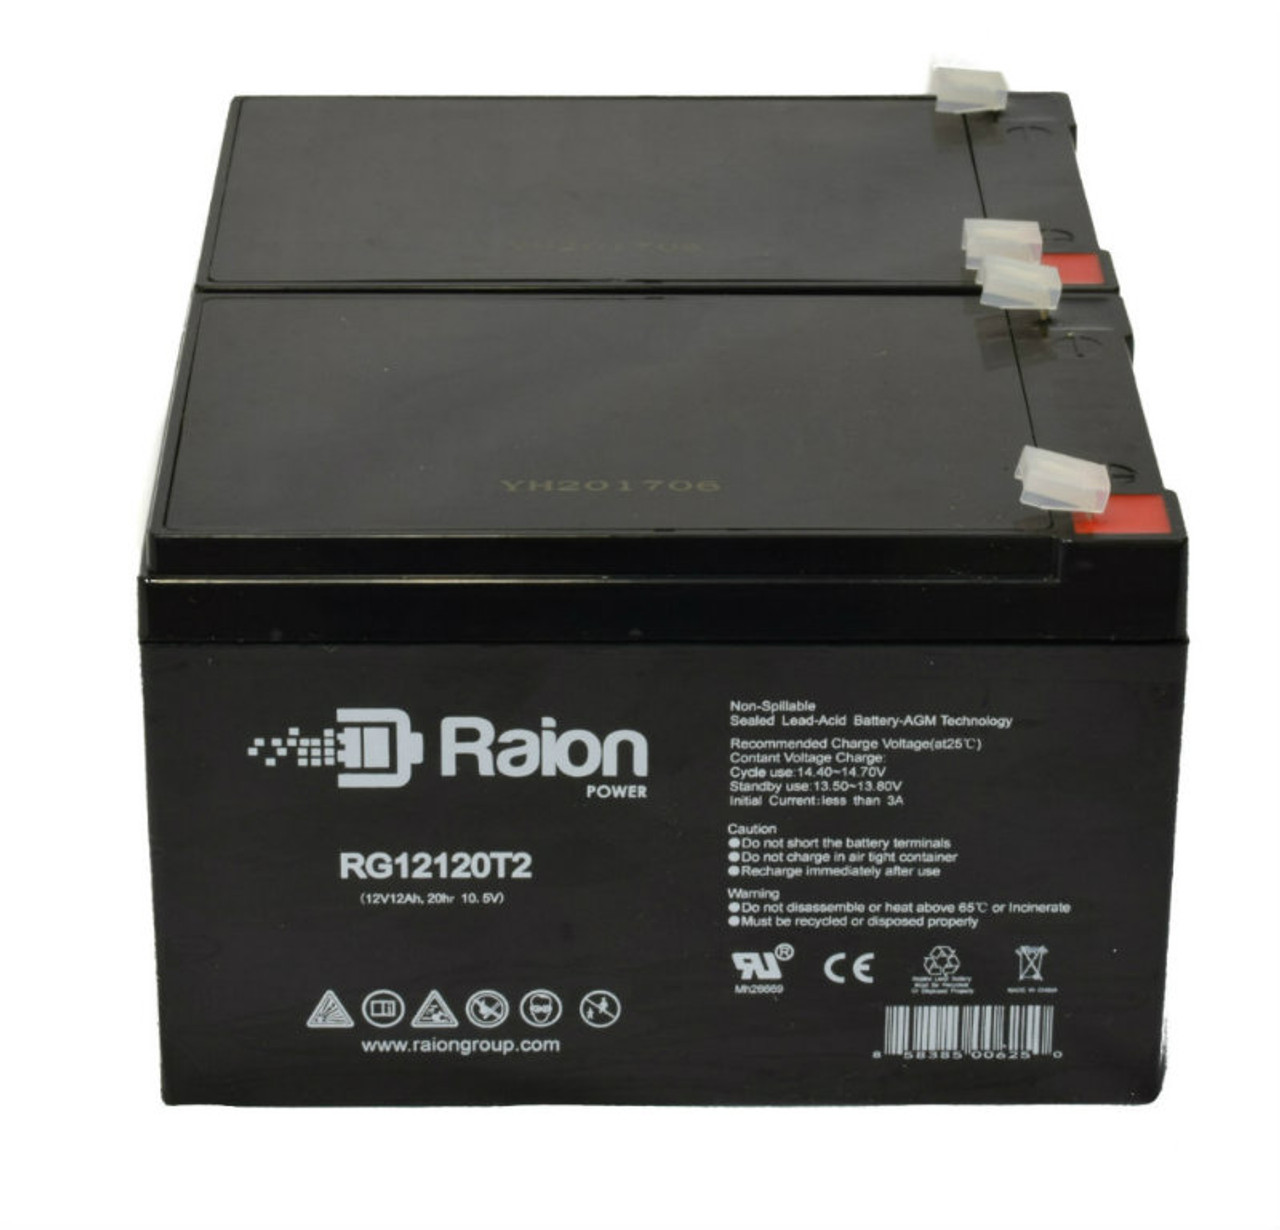 Raion Power RG12120T2 Replacement Emergency Light Battery for Sonnenschein A212/10.0S - 2 Pack